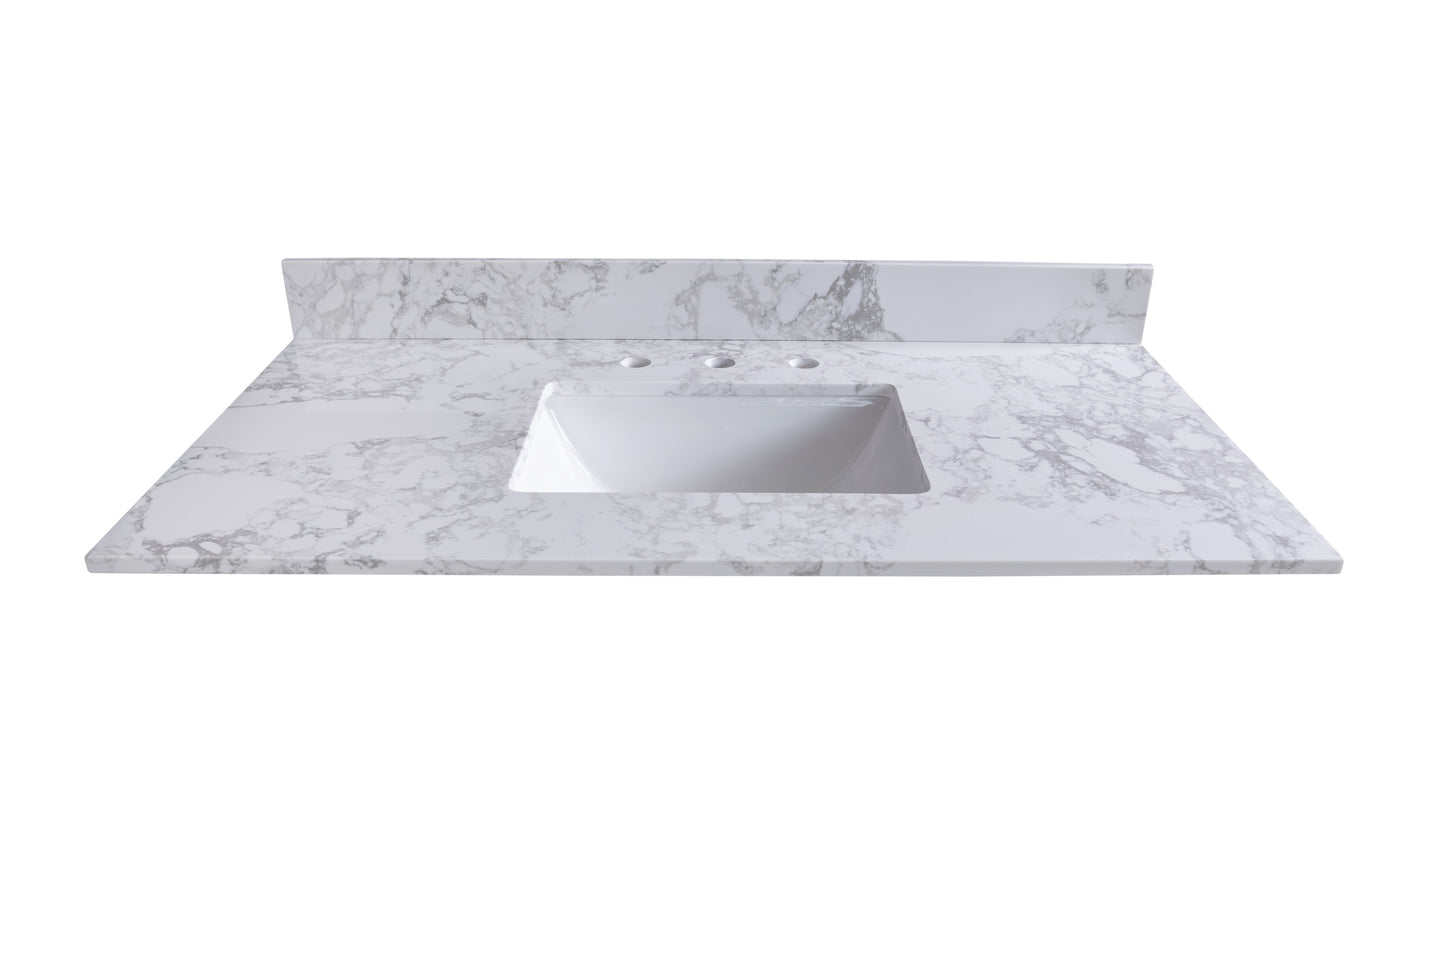 Montary 49‘’x22" bathroom stone vanity top  engineered stone carrara white marble color with rectangle undermount ceramic sink and 3 faucet hole with back splash .